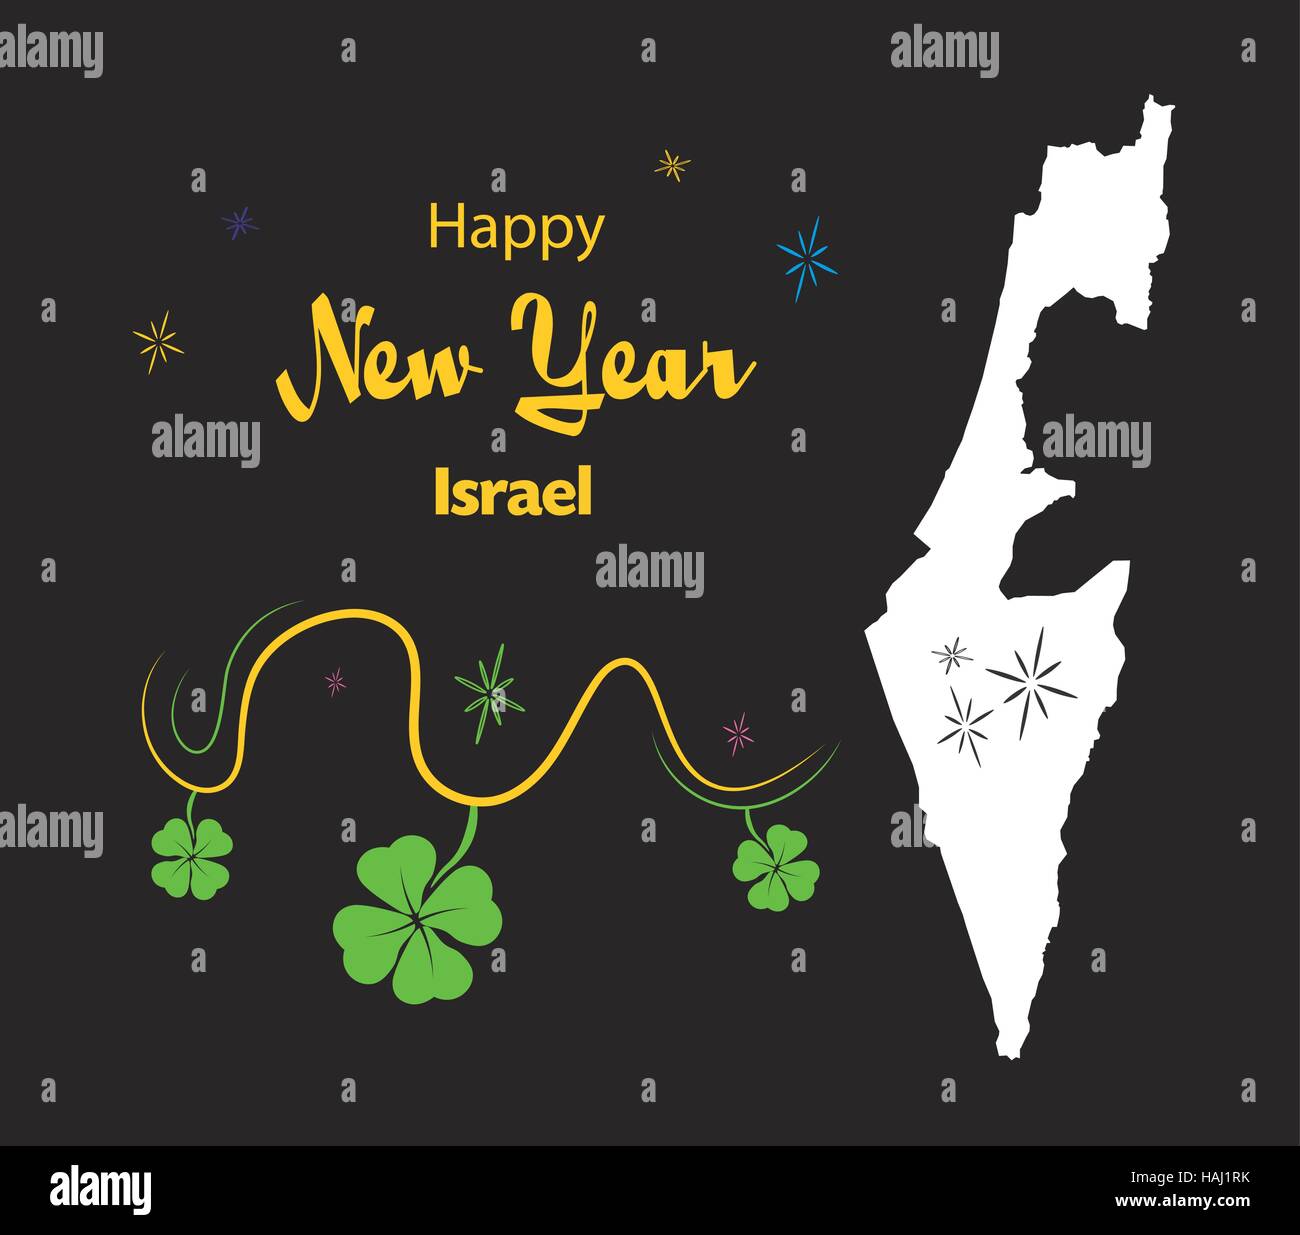 Happy New Year illustration theme with map of Israel Stock Vector Image